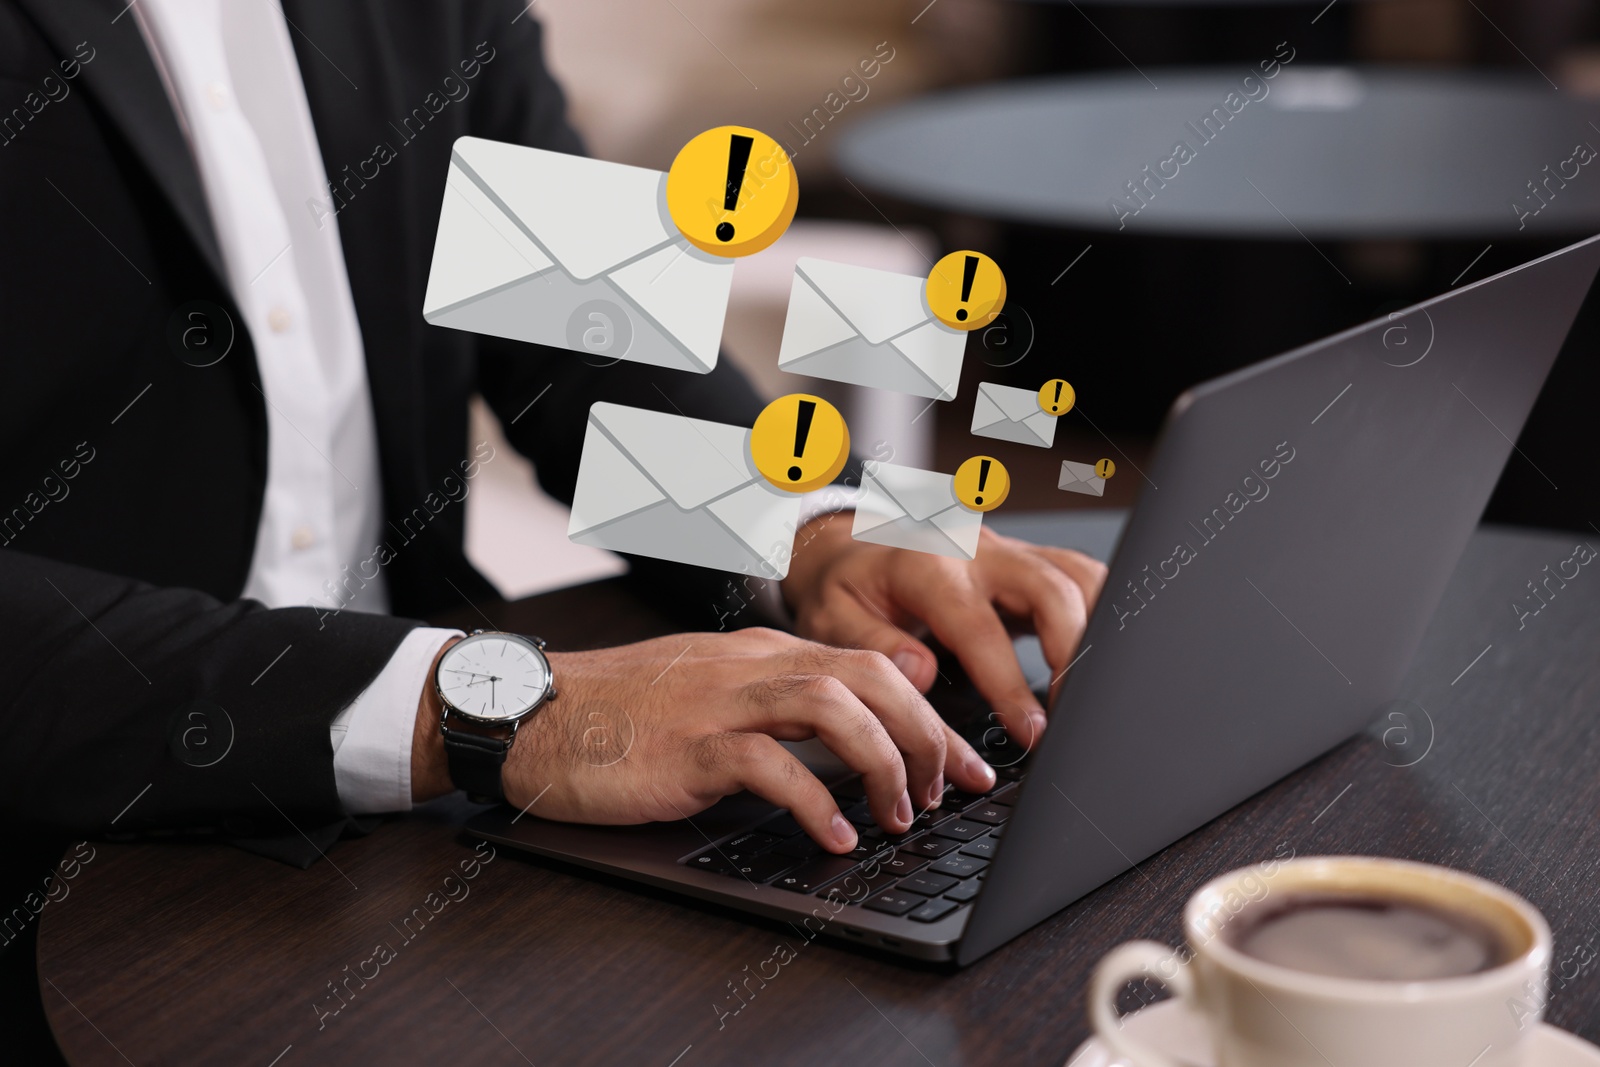 Image of Man using laptop at table, closeup. Spam message notifications above device, illustration